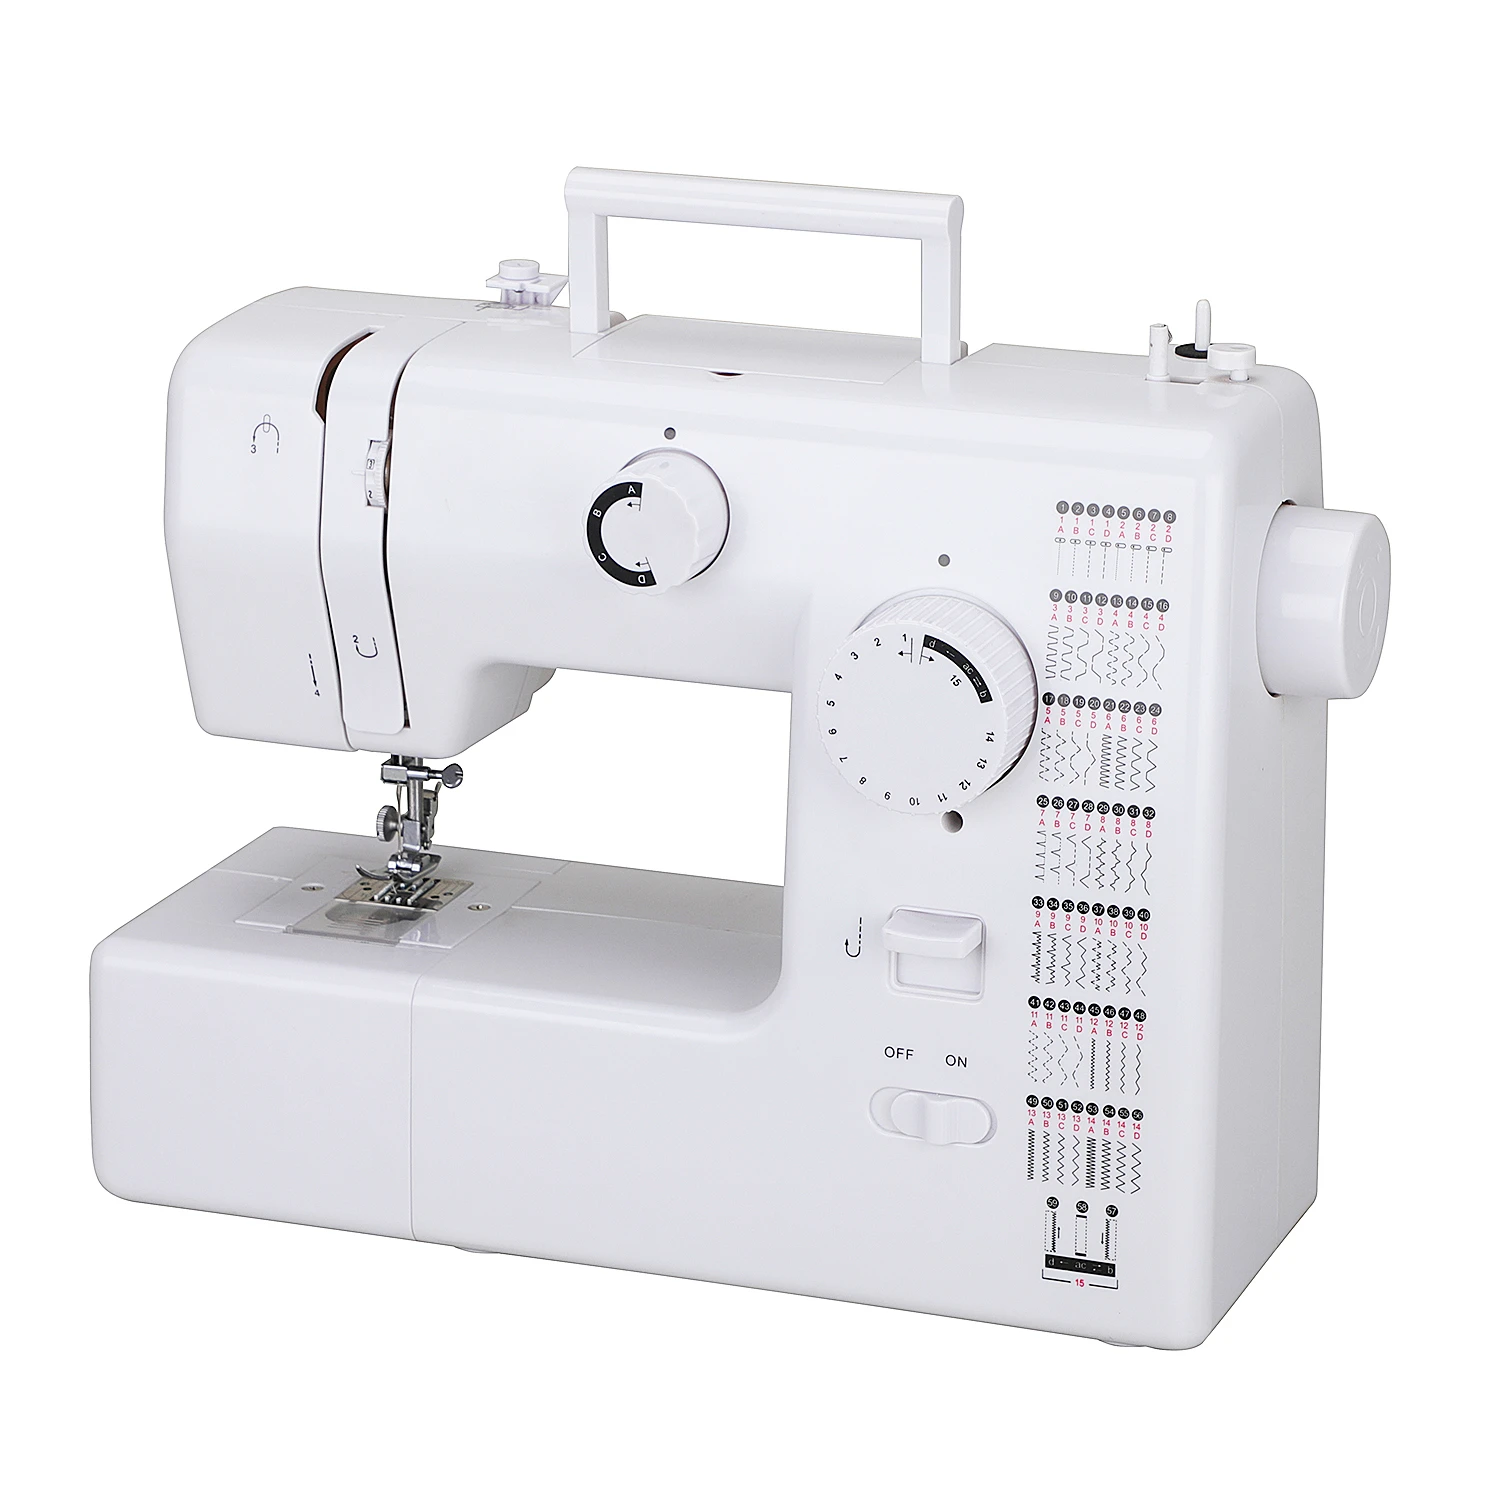 Small household sewing machine, new style and high quality